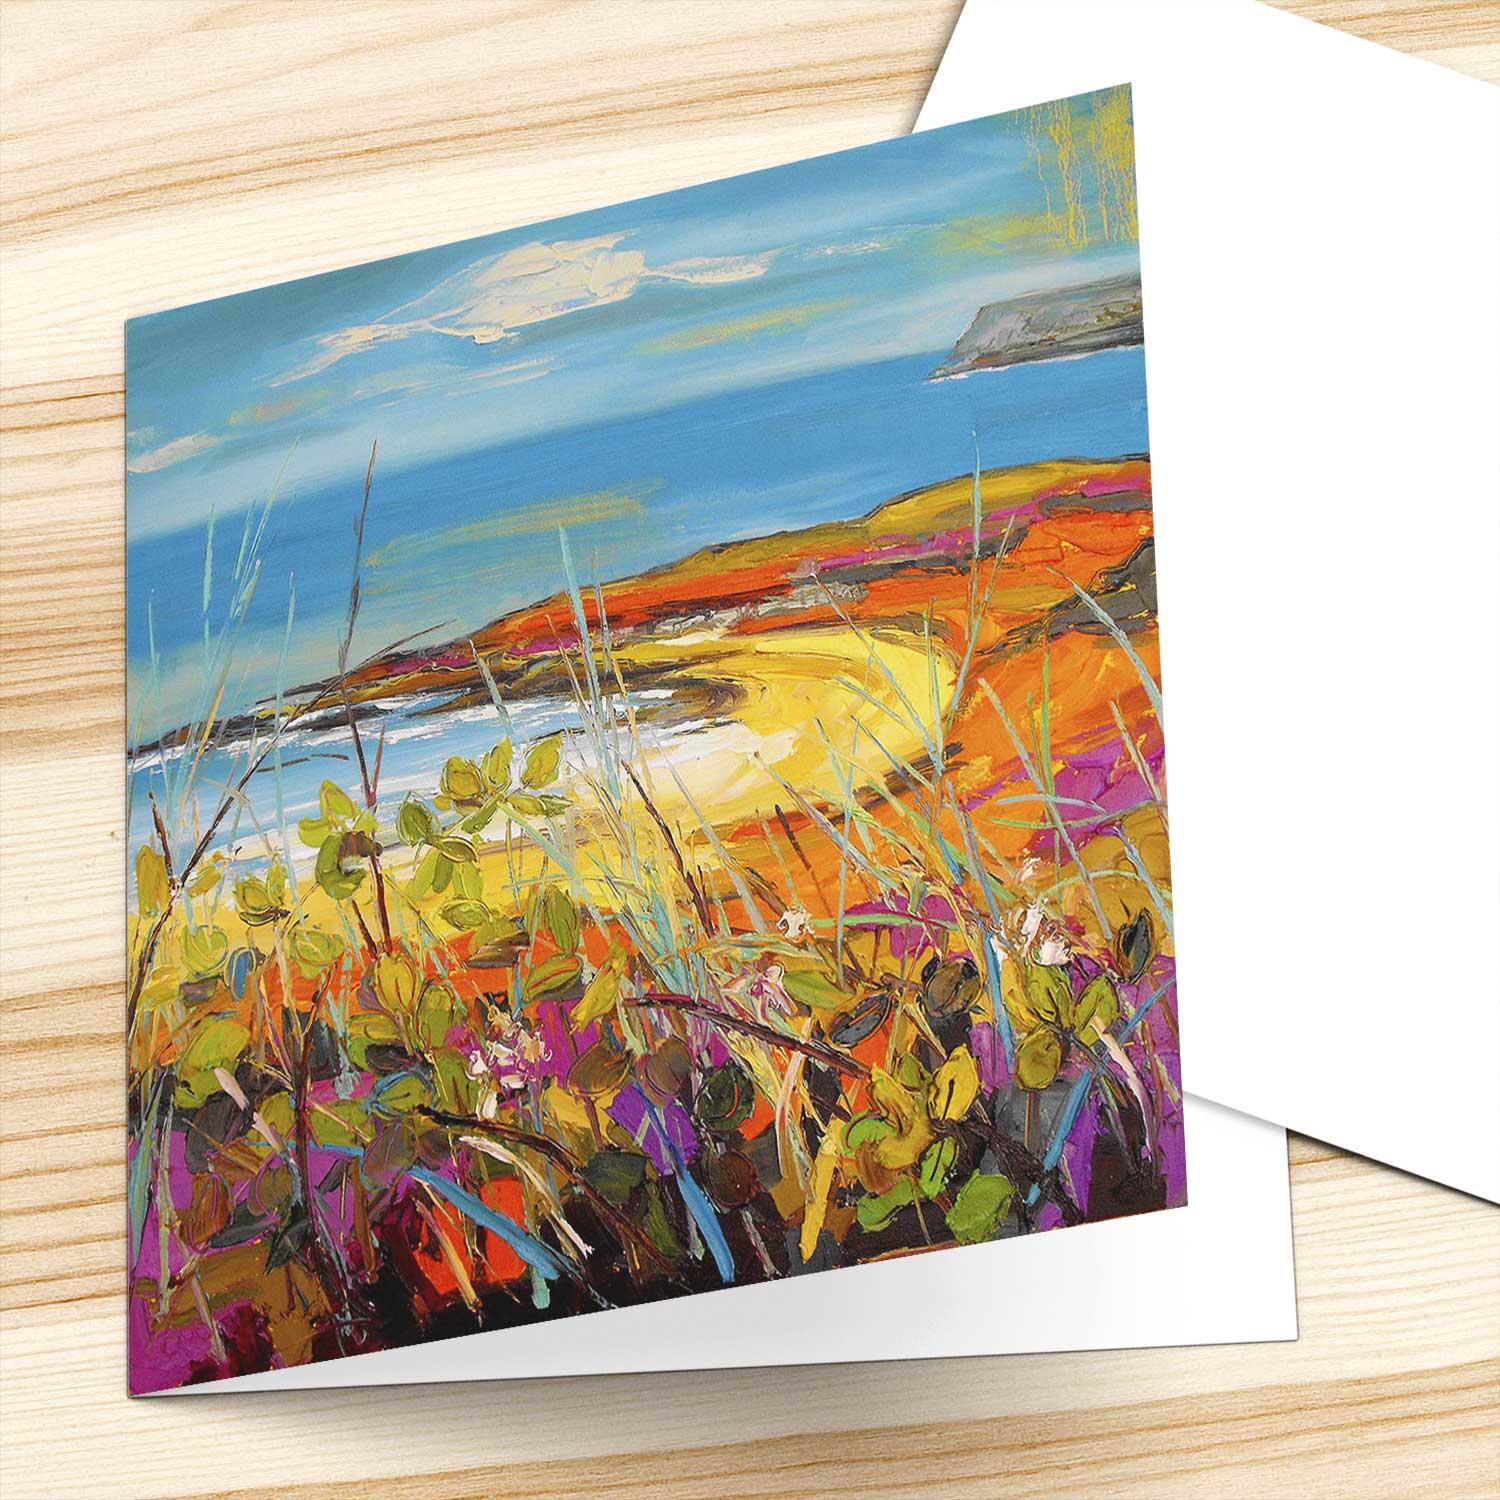 Brambles and Grasses, White Park Bay Greeting Card from an original painting by artist Judith I Bridgland